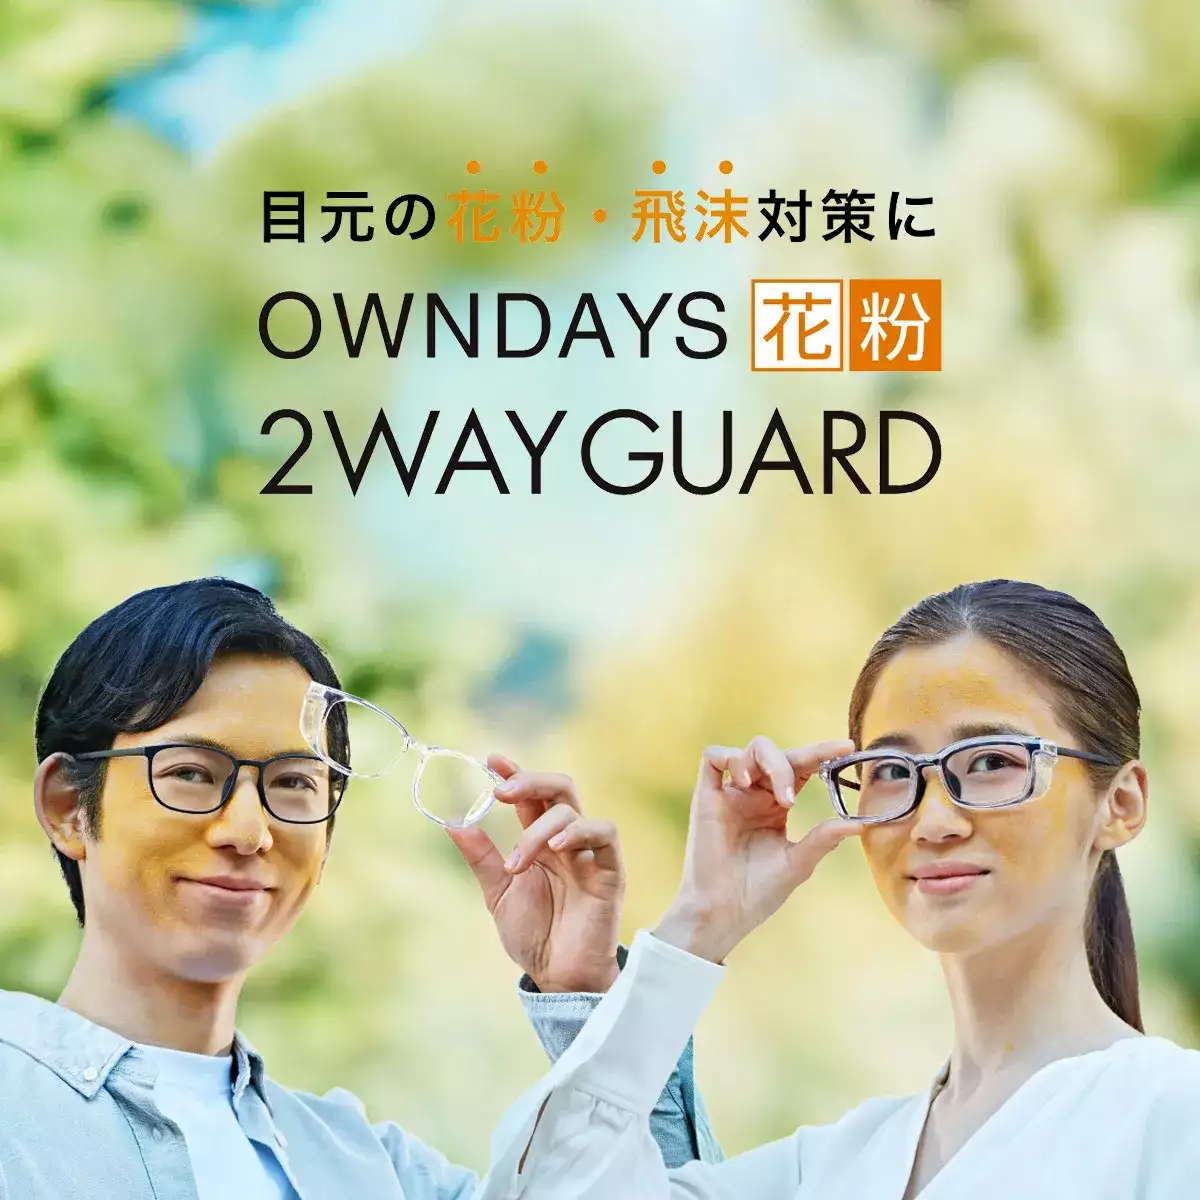 OWNDAYS 花粉 2WAY GUARD